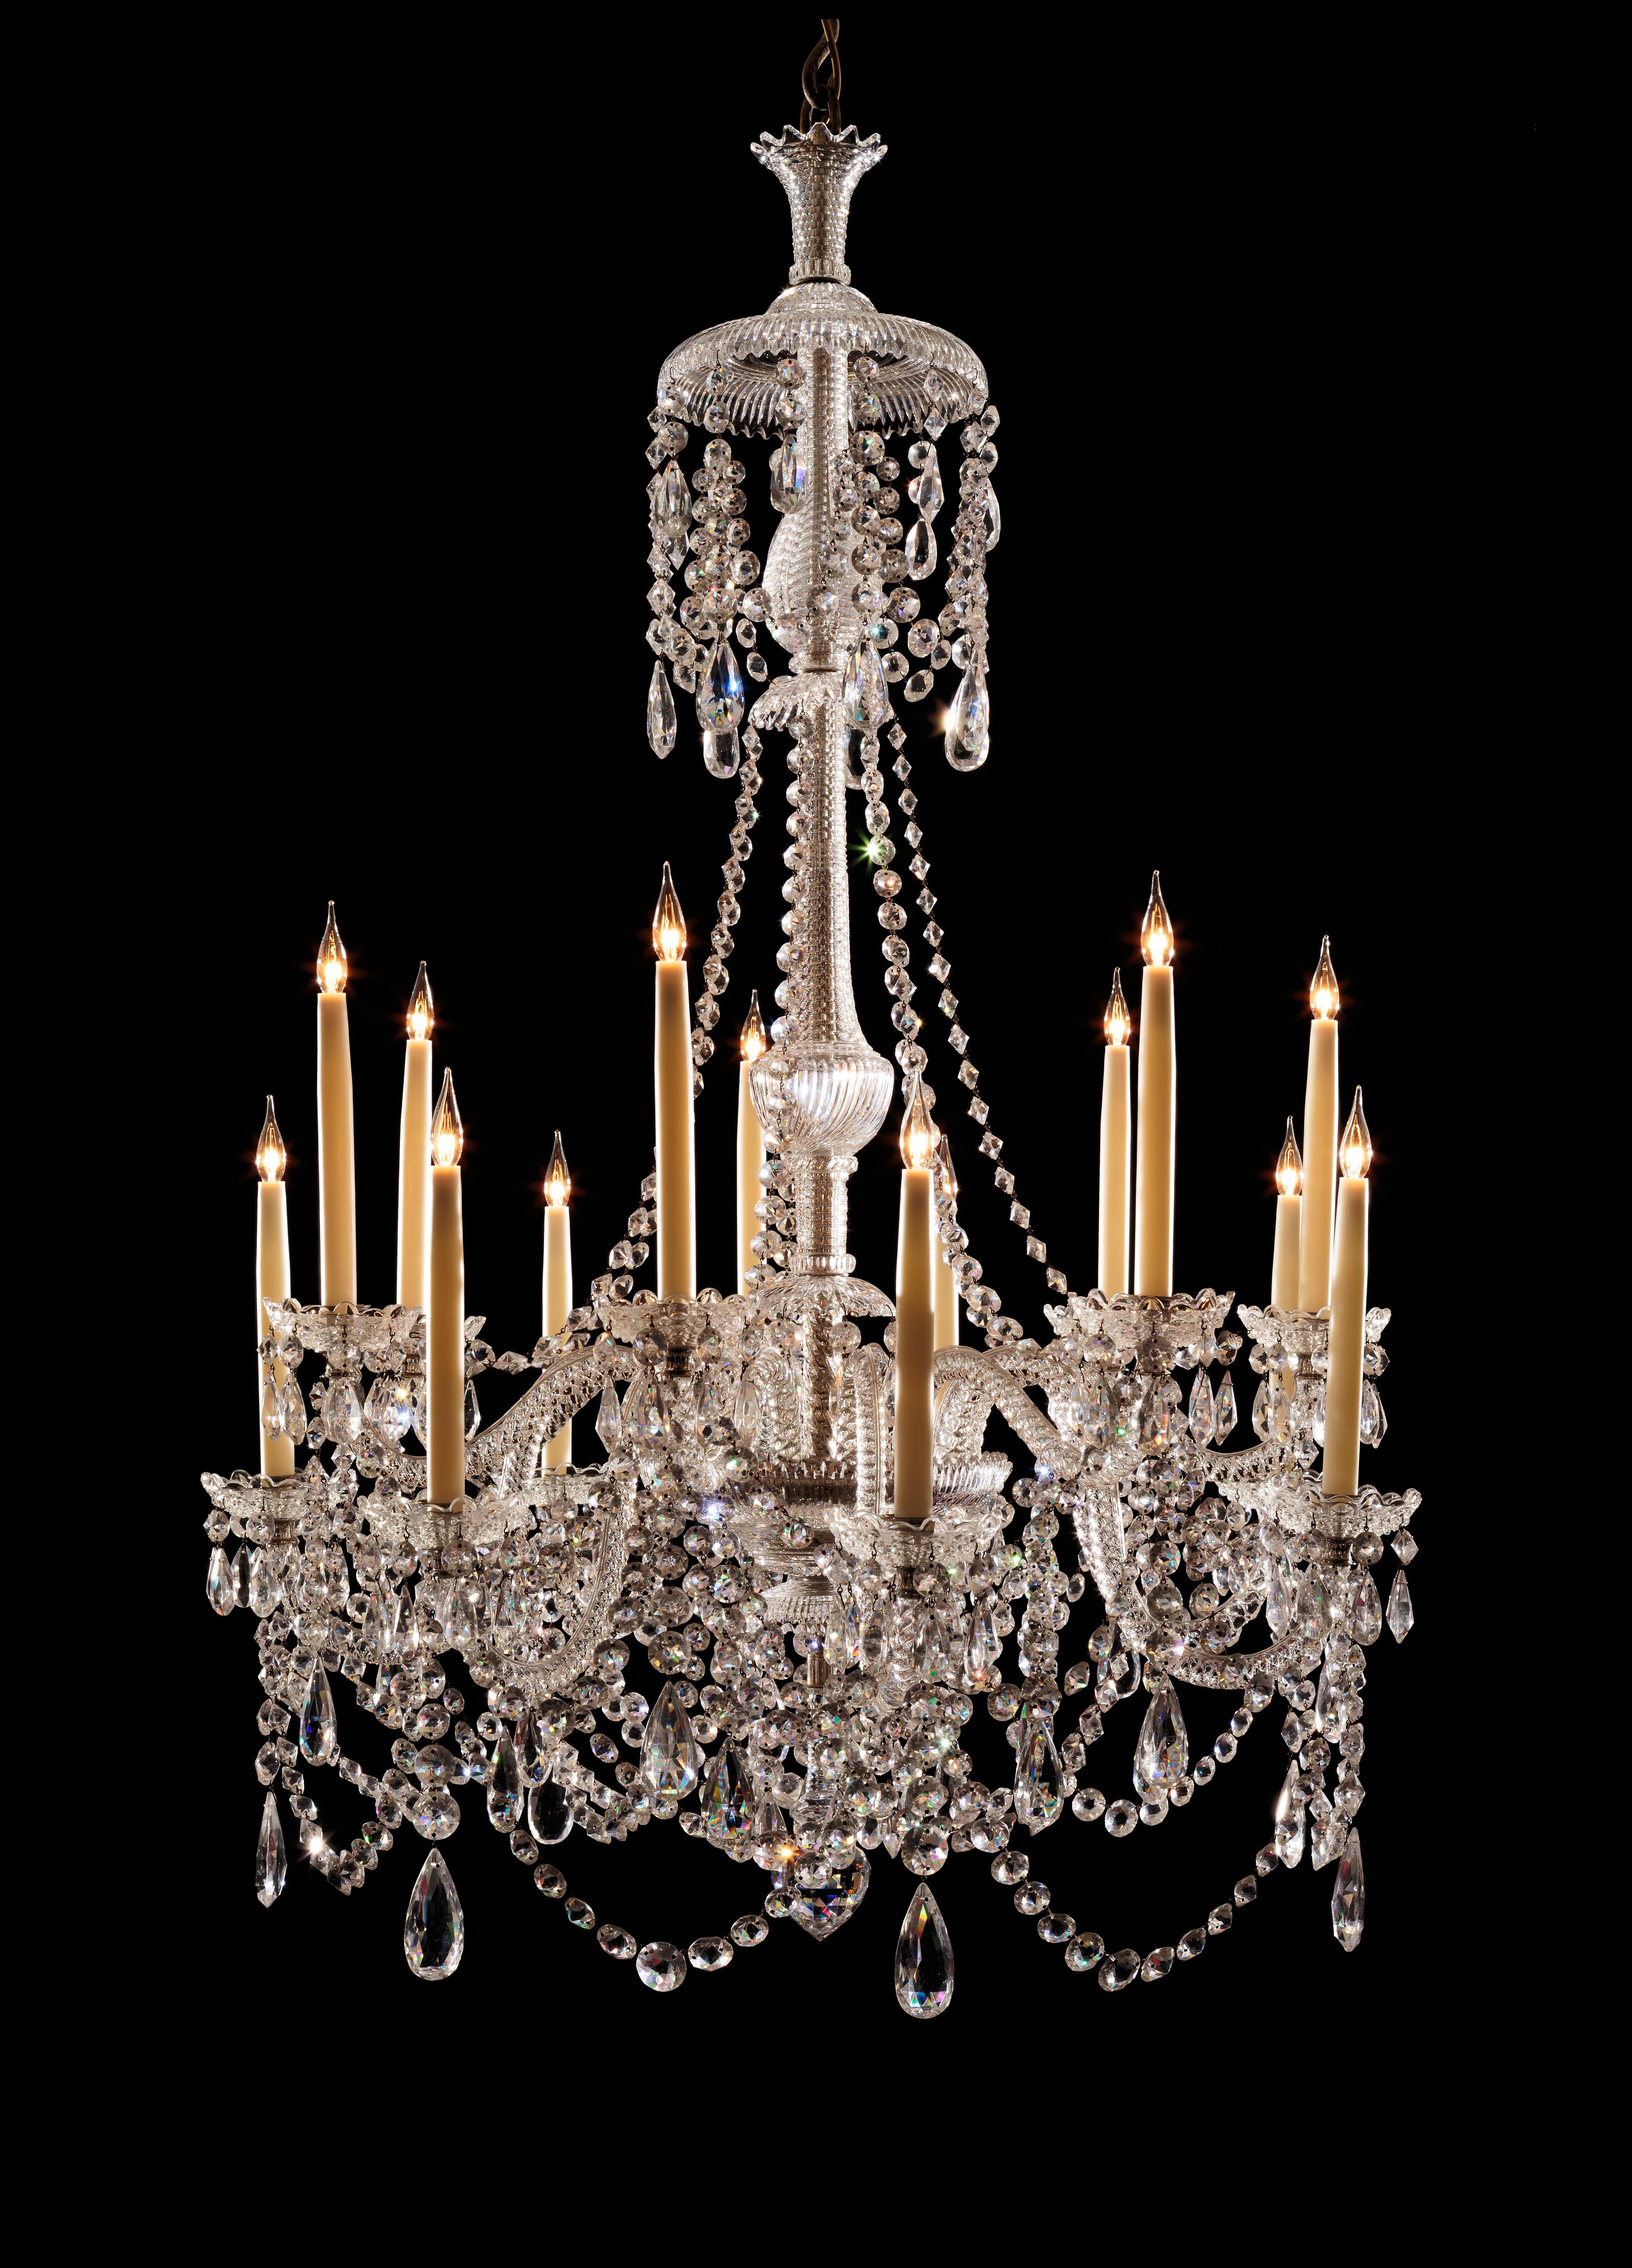 A stunning original Perry chandelier arranged on two tiers with seven solid lead crystal 's' arms and seven solid lead crystal kick arms and traditional “step” cutting on the central shaft pieces, dressed with swags of round double pointed buttons